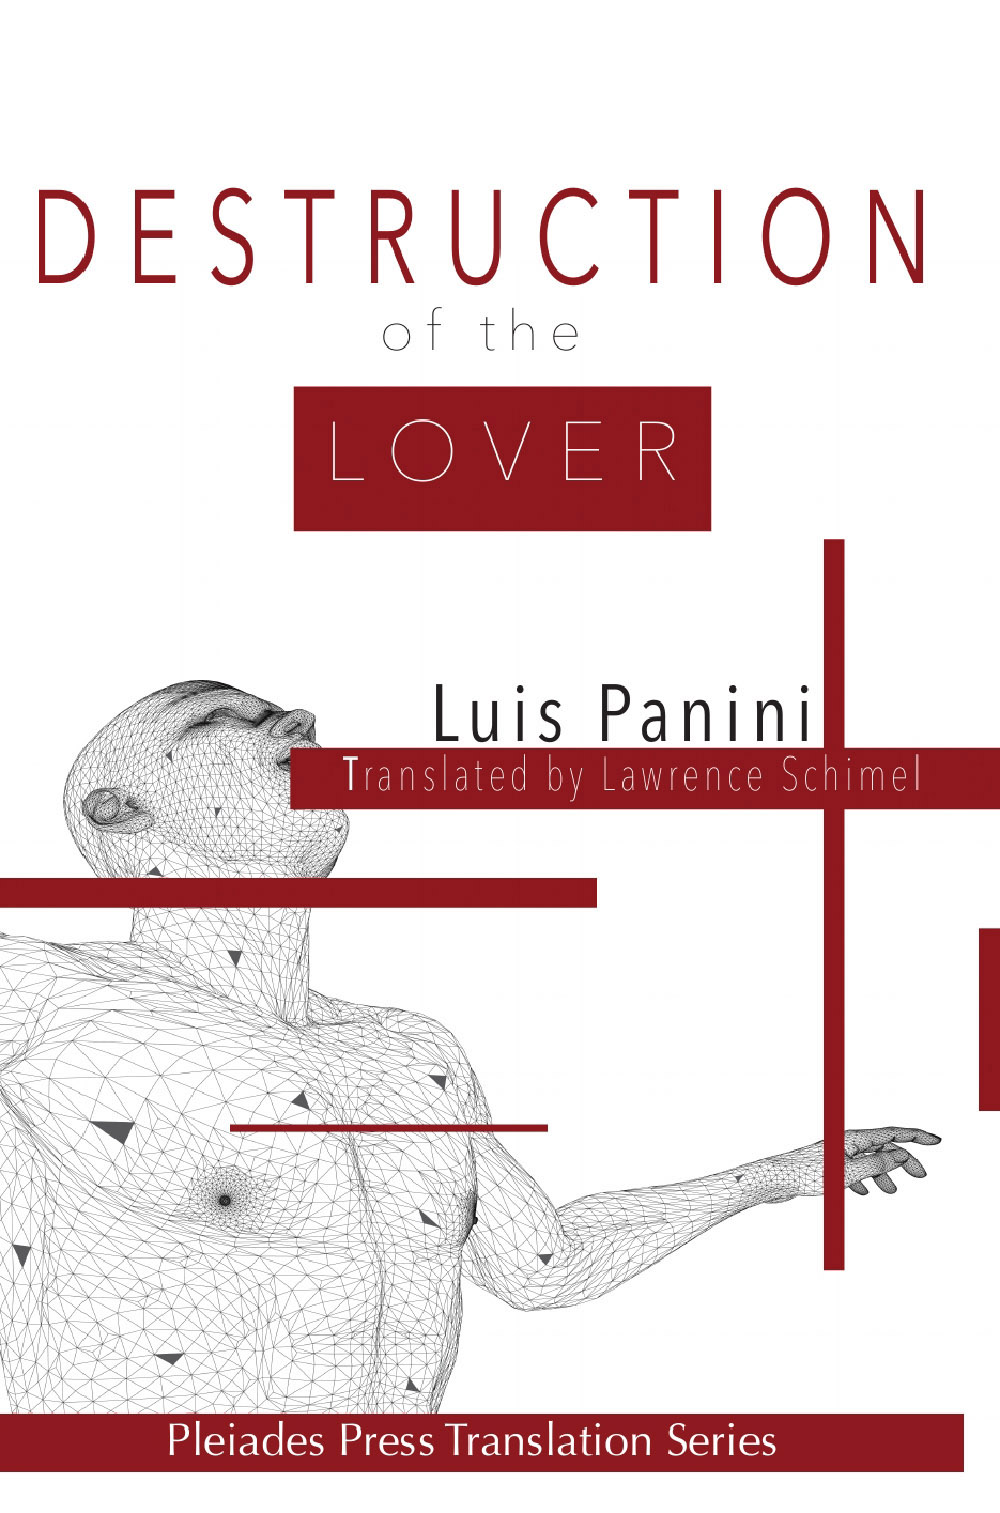 Destruction of the Lover by Luis Panini